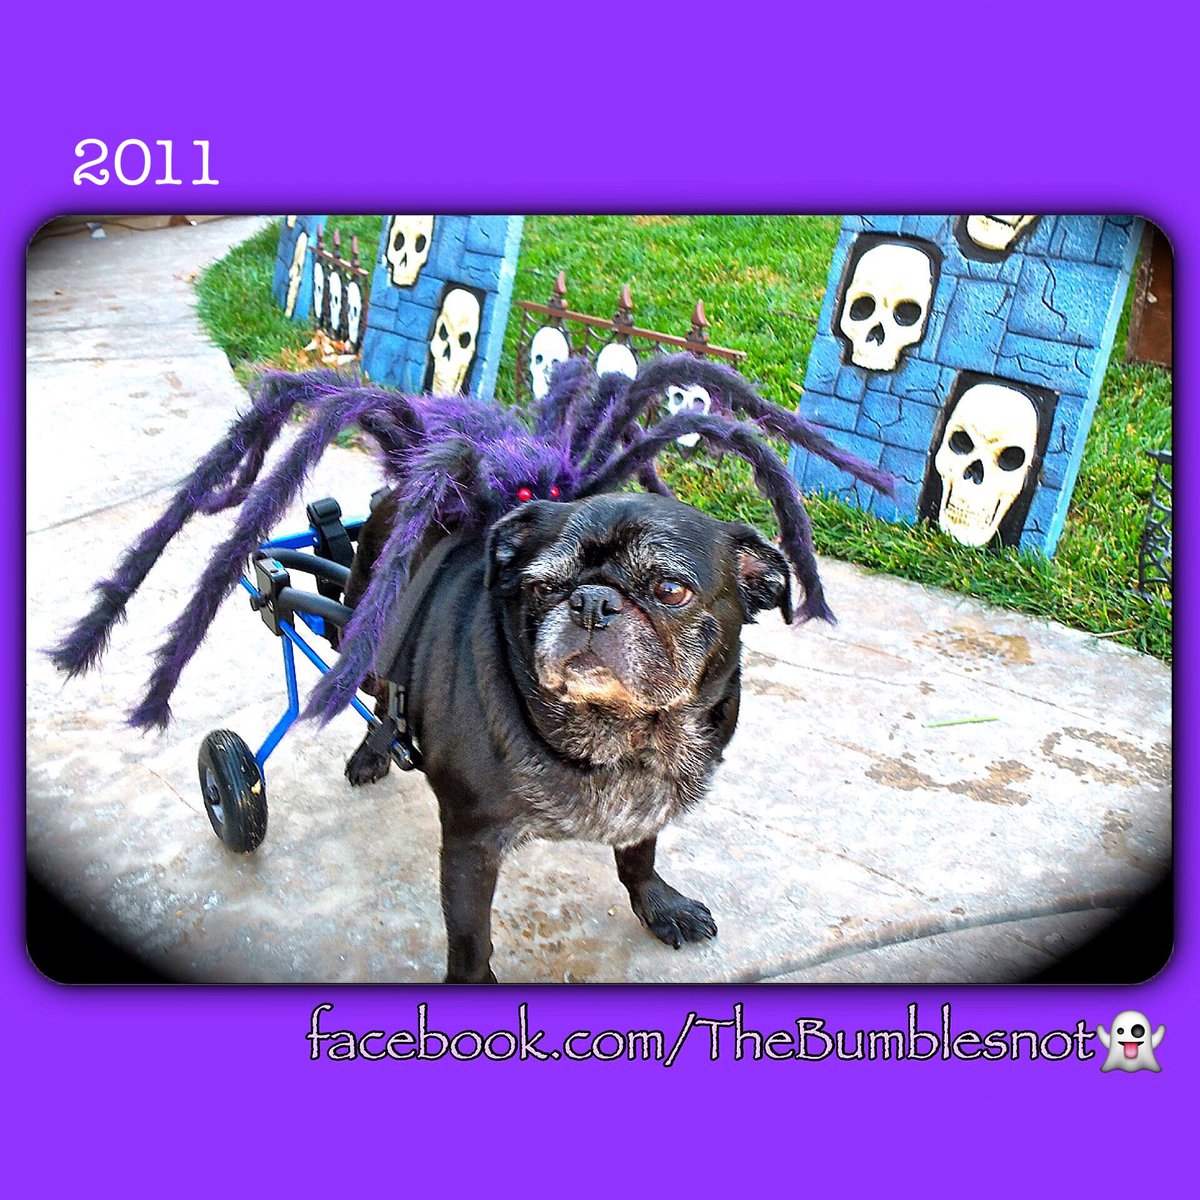 #FlashbackFriday to when Bumble was pretty darn sure he was being tricked before getting some treats.
🐶💜🌈🙄🕷🎃
#missingbumbleoneyearlater #spiderpug #wheresmytreat #weboflies #imhungry #theressomethingonmeamiright #neverforgotten #alwaysinourhearts #halloweenpug